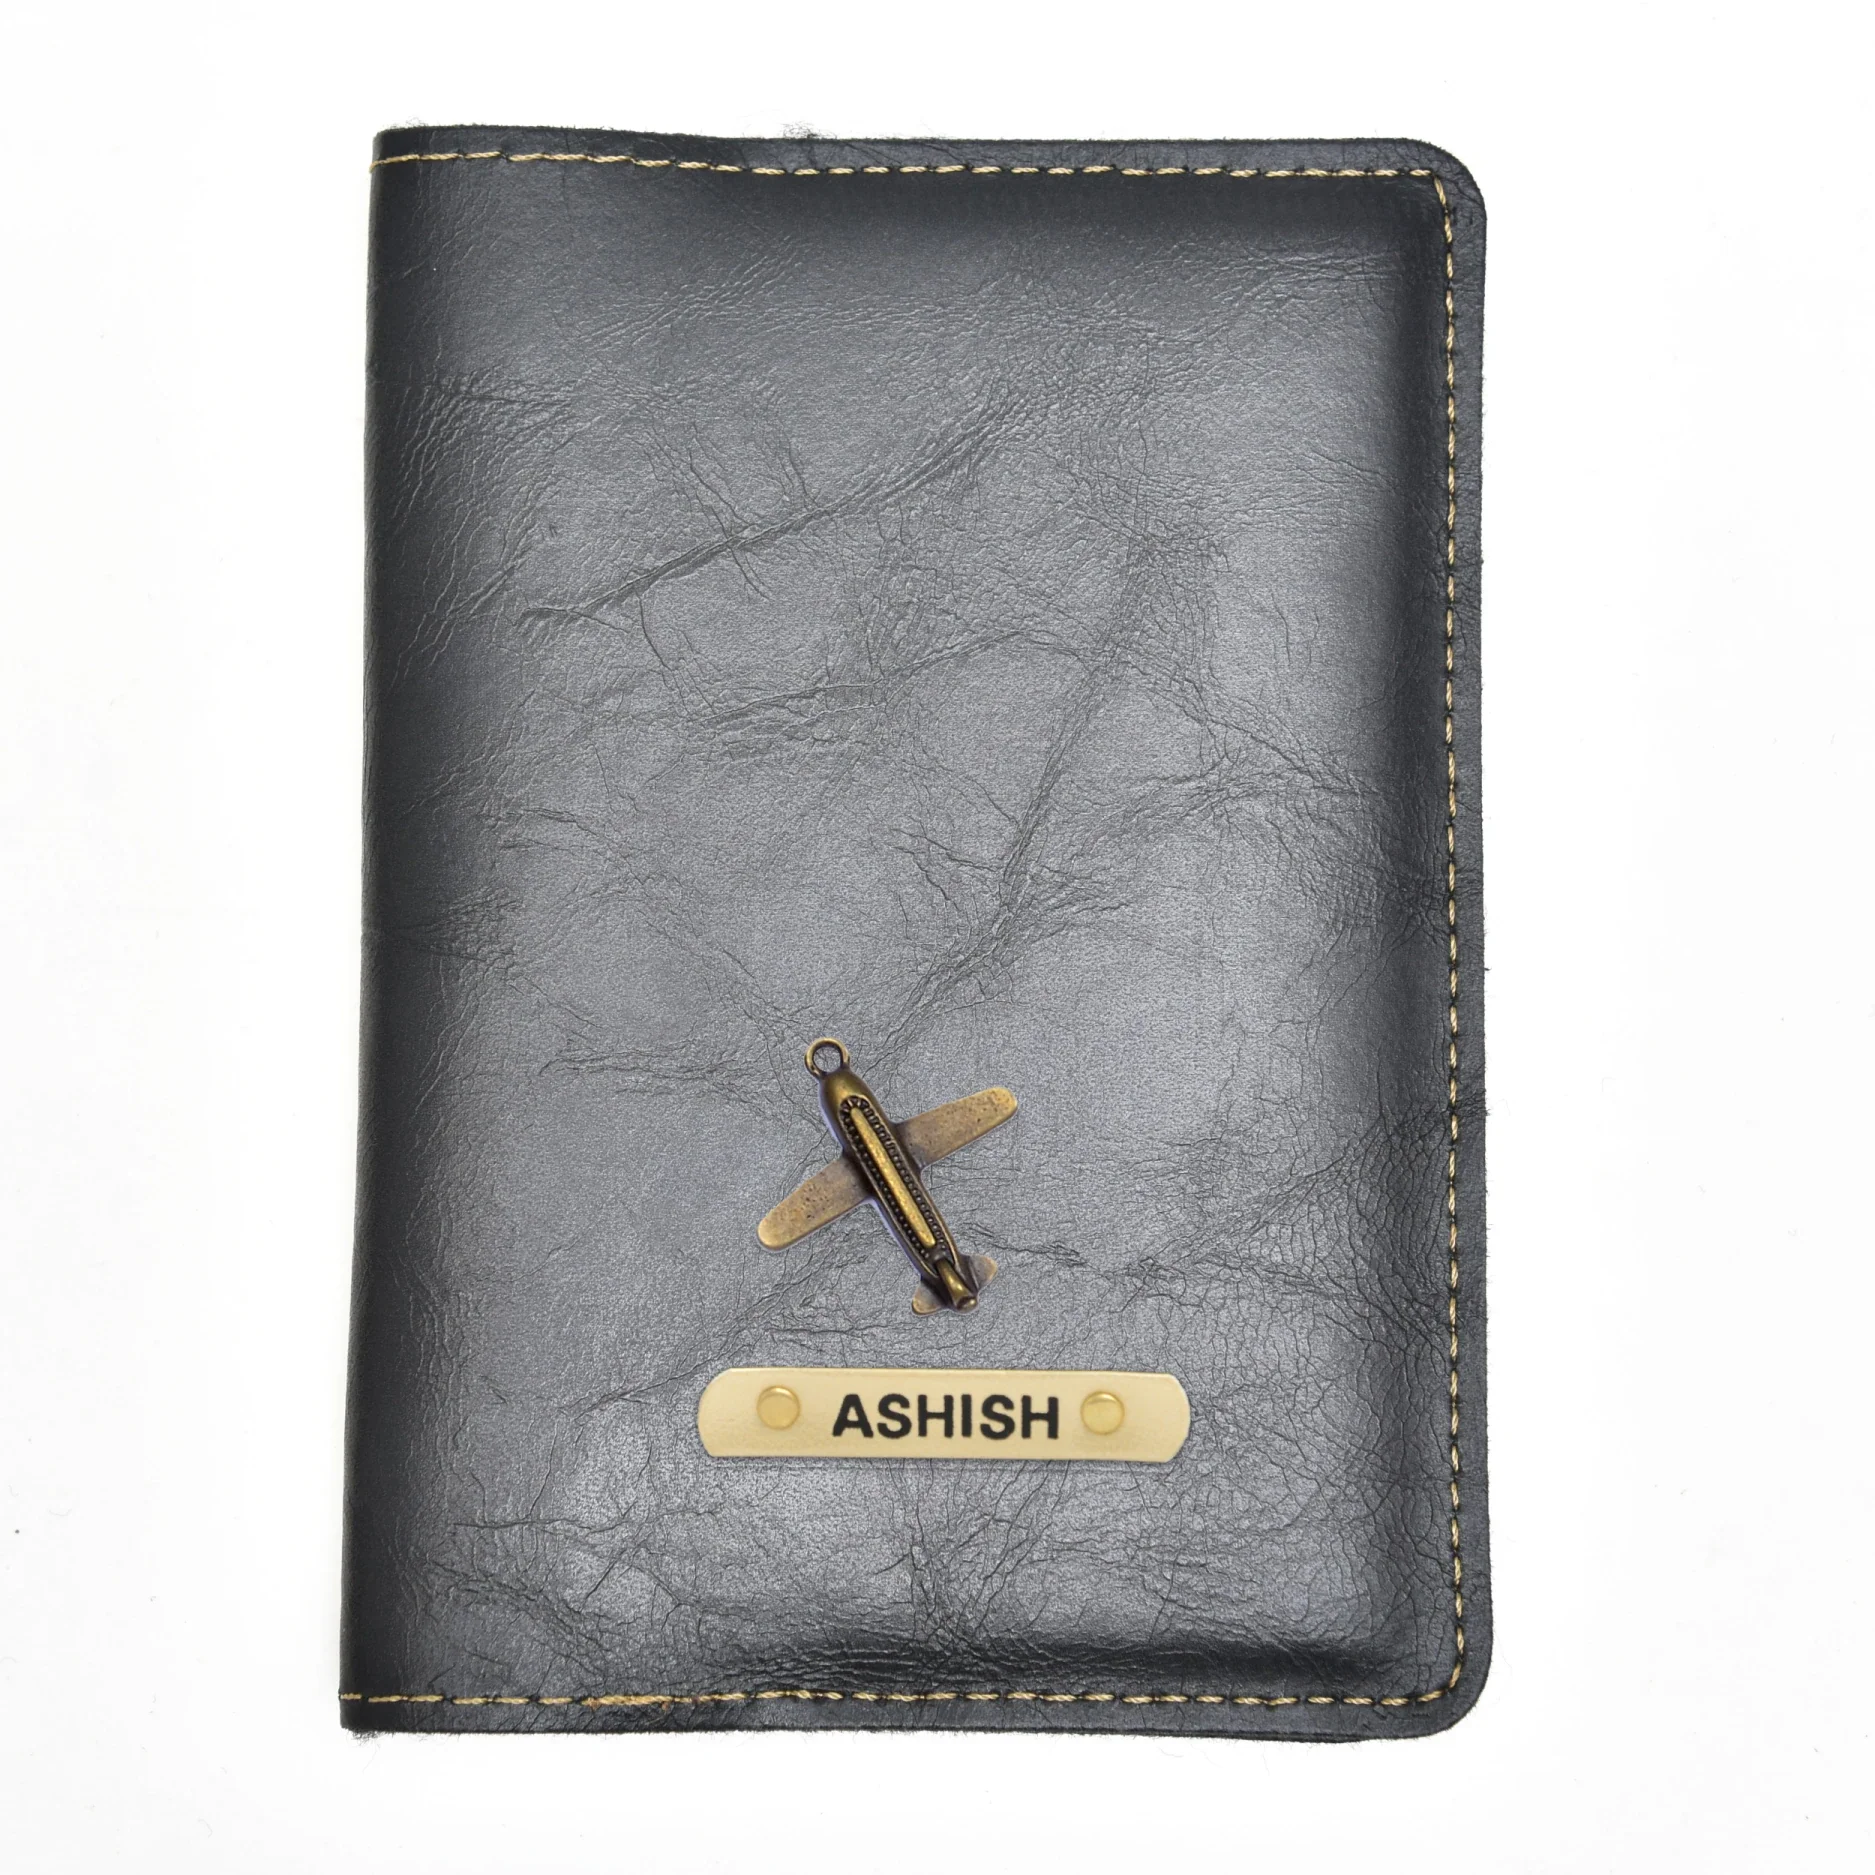 Travel in elegance with a customized leather passport case that adds a touch of luxury to your journey.